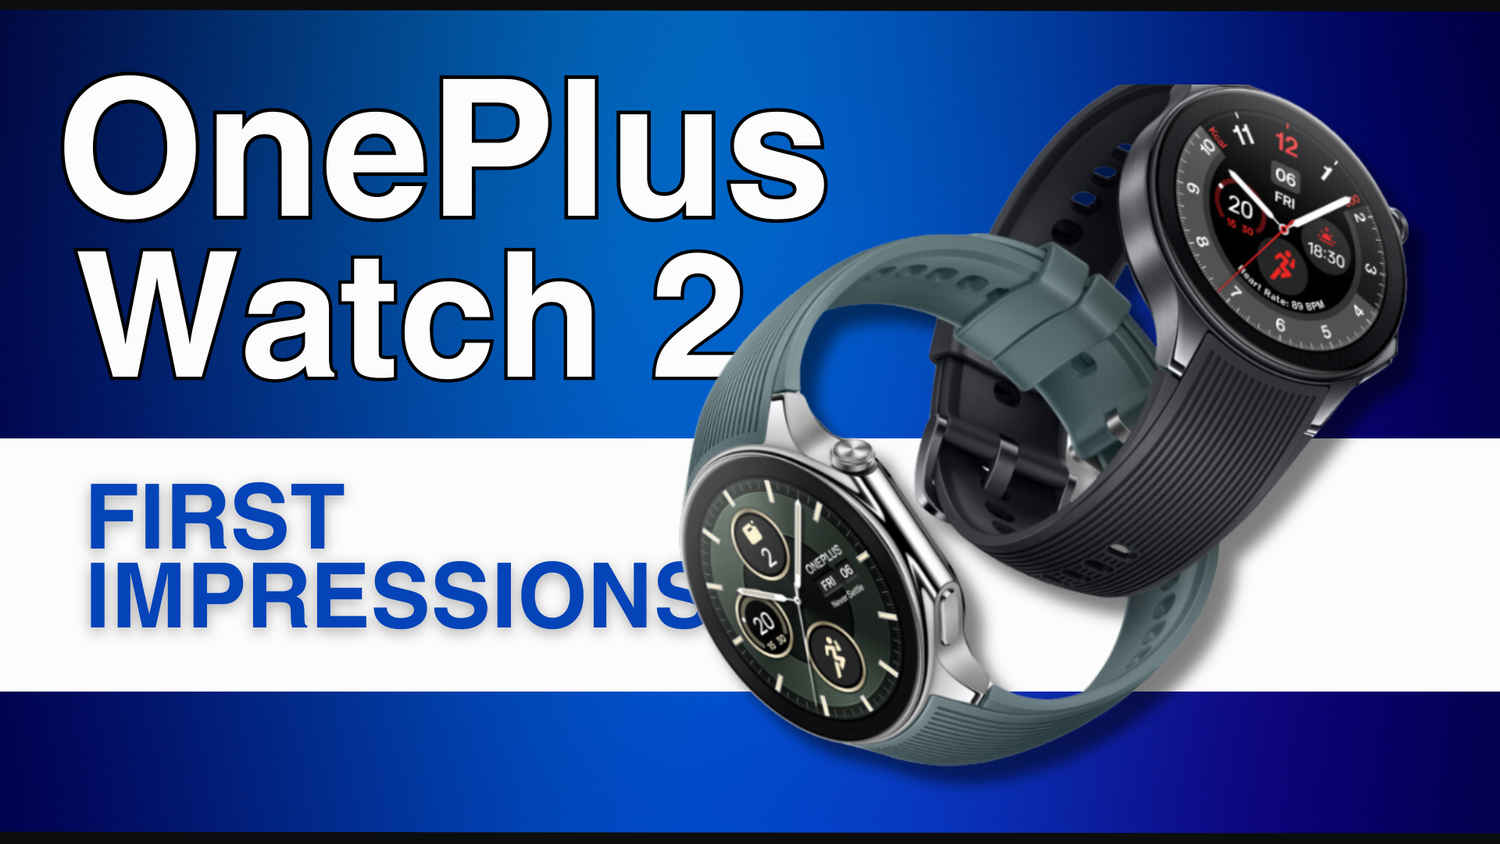 OnePlus Watch 2 launched at ₹24,999 – Is the Dual-Engine Architecture here to stay?